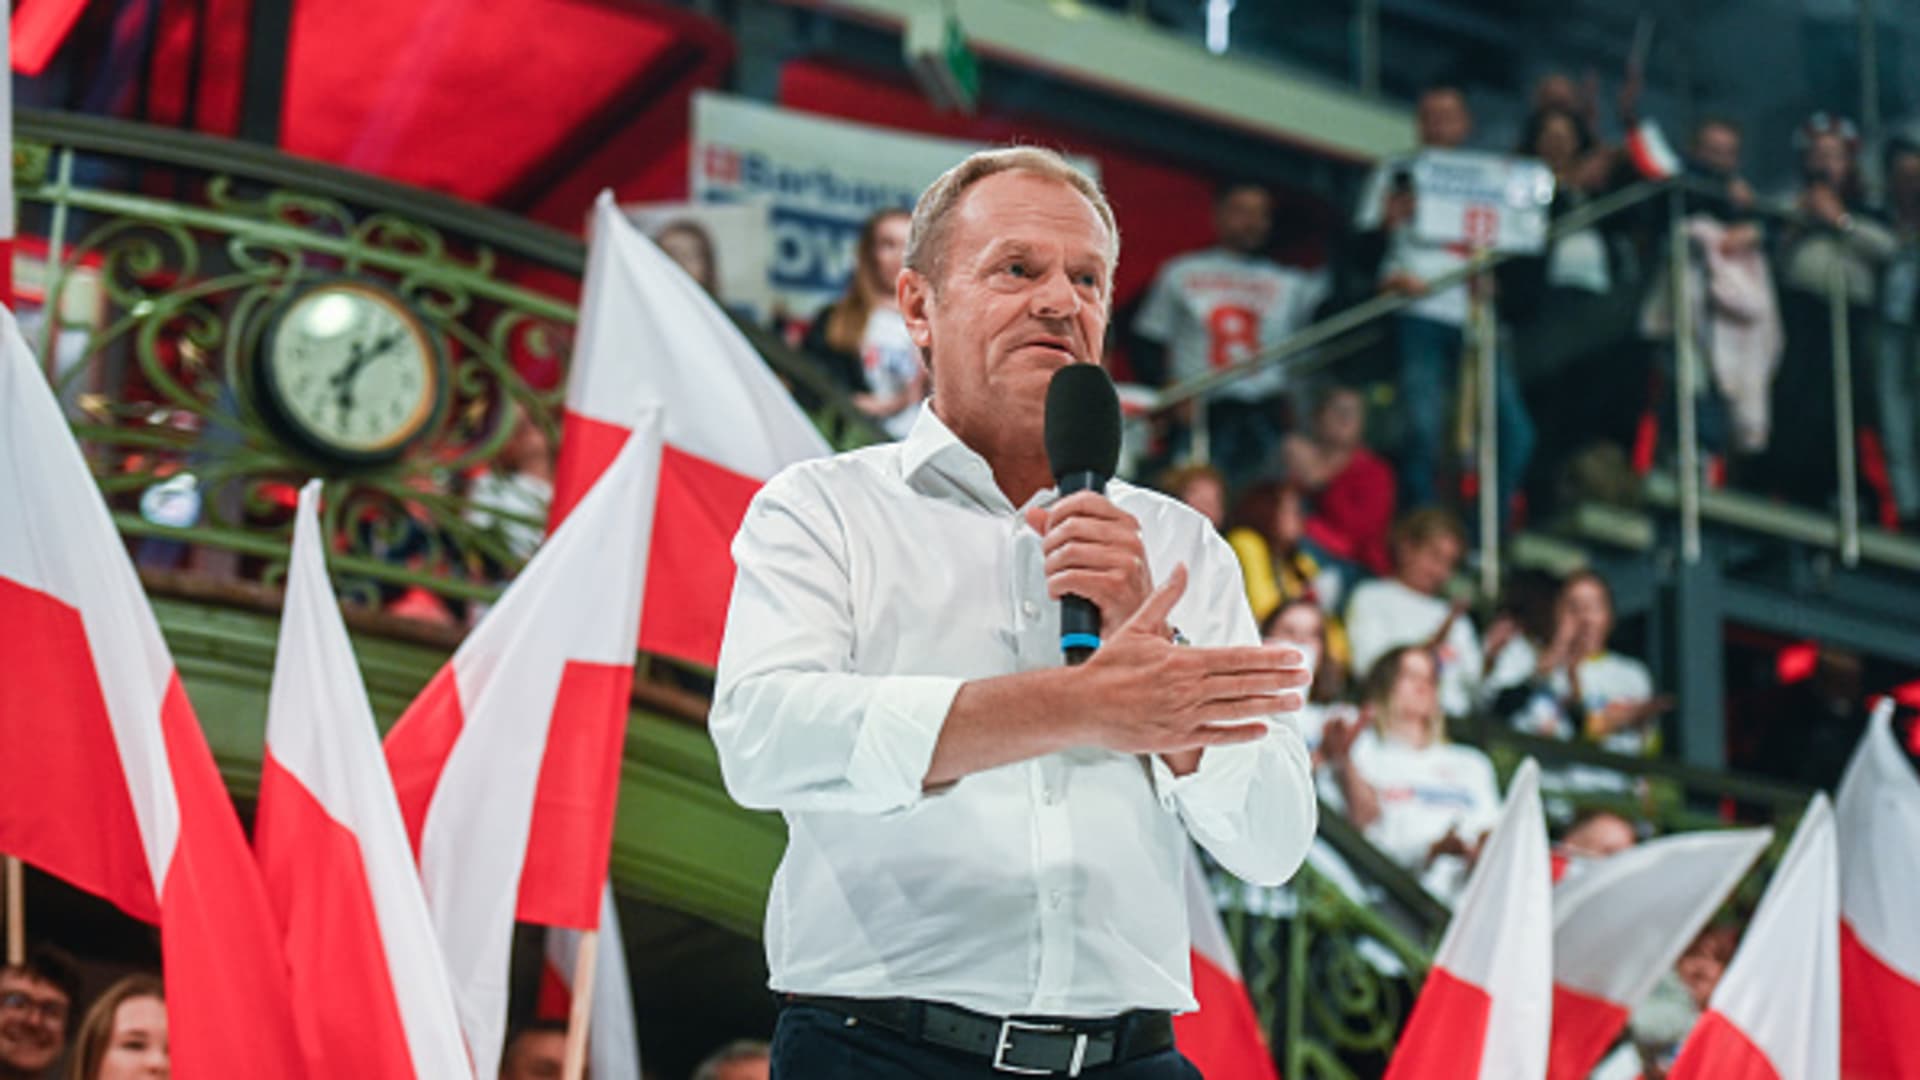 The Leader of Civic Coalition Party, Donald Tusk delivers a speech during the Women for Elections Campaign rally on October 10, 2023 in Lodz, Poland.